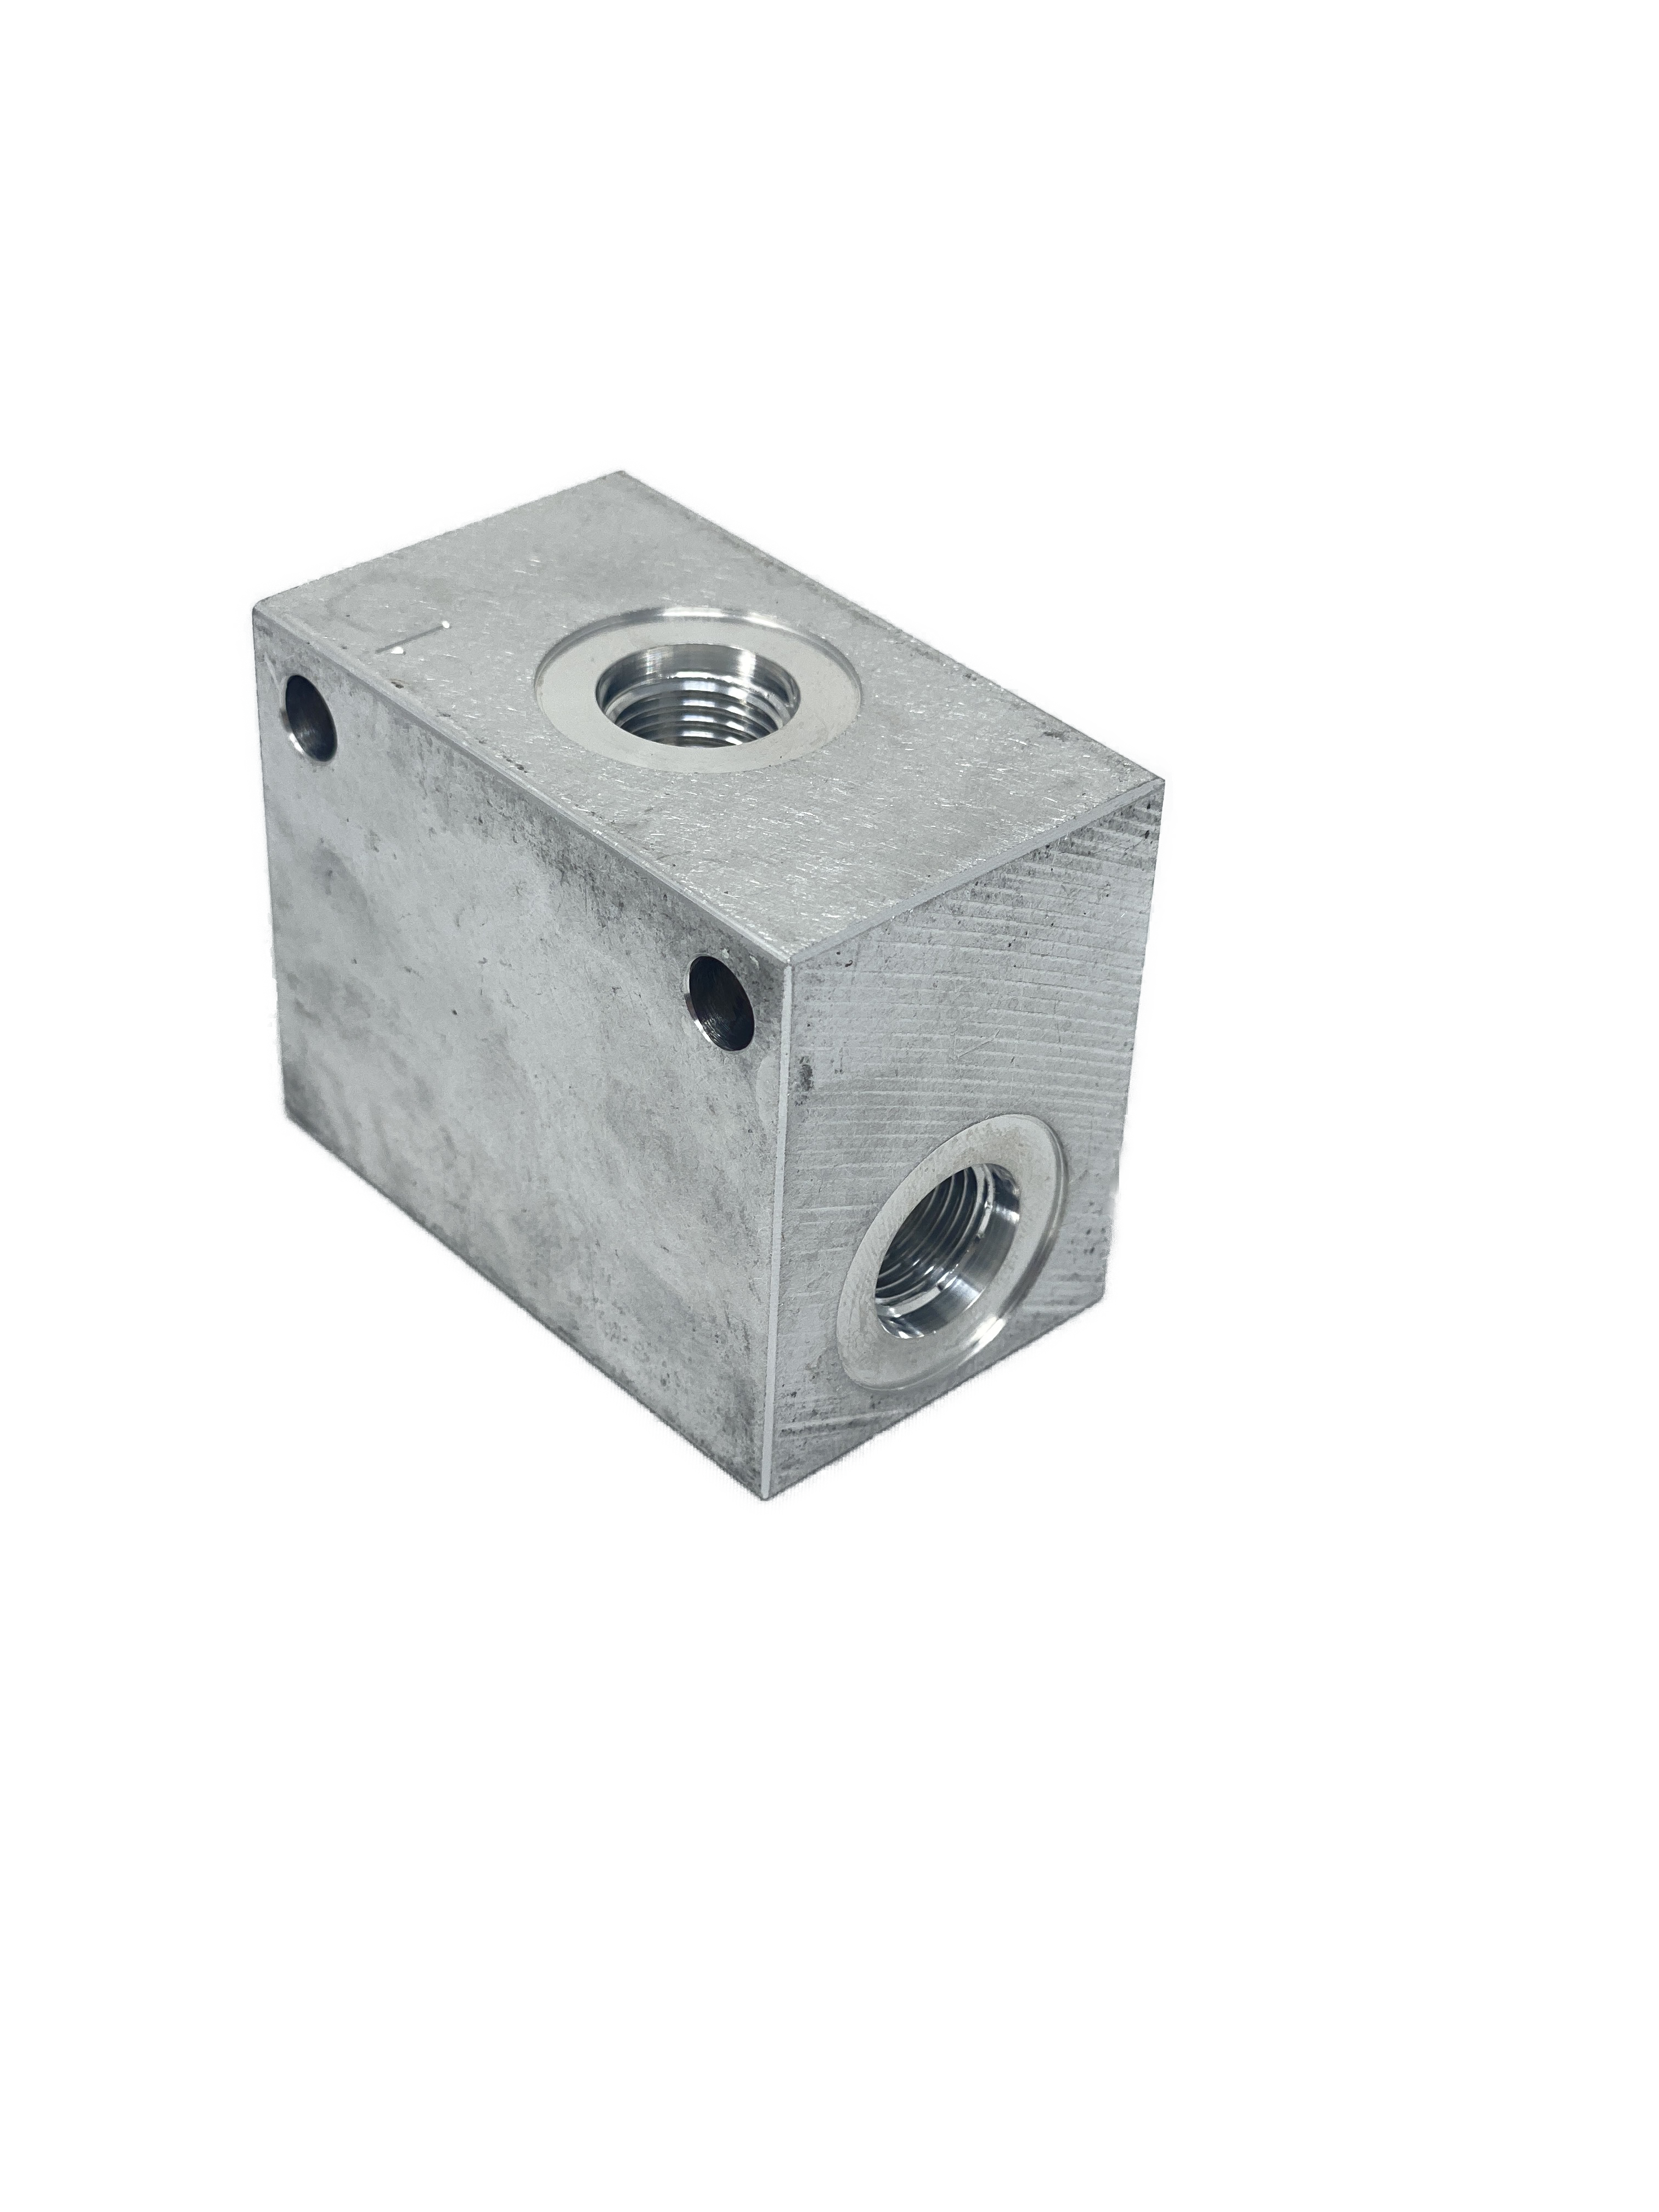 AC162CB12S : Daman Common Cavity Body, C-16-2 Cartridge Cavity, #12 SAE (3/4") Port Connections, 3000psi Rated, Aluminum, Without Gauge Port